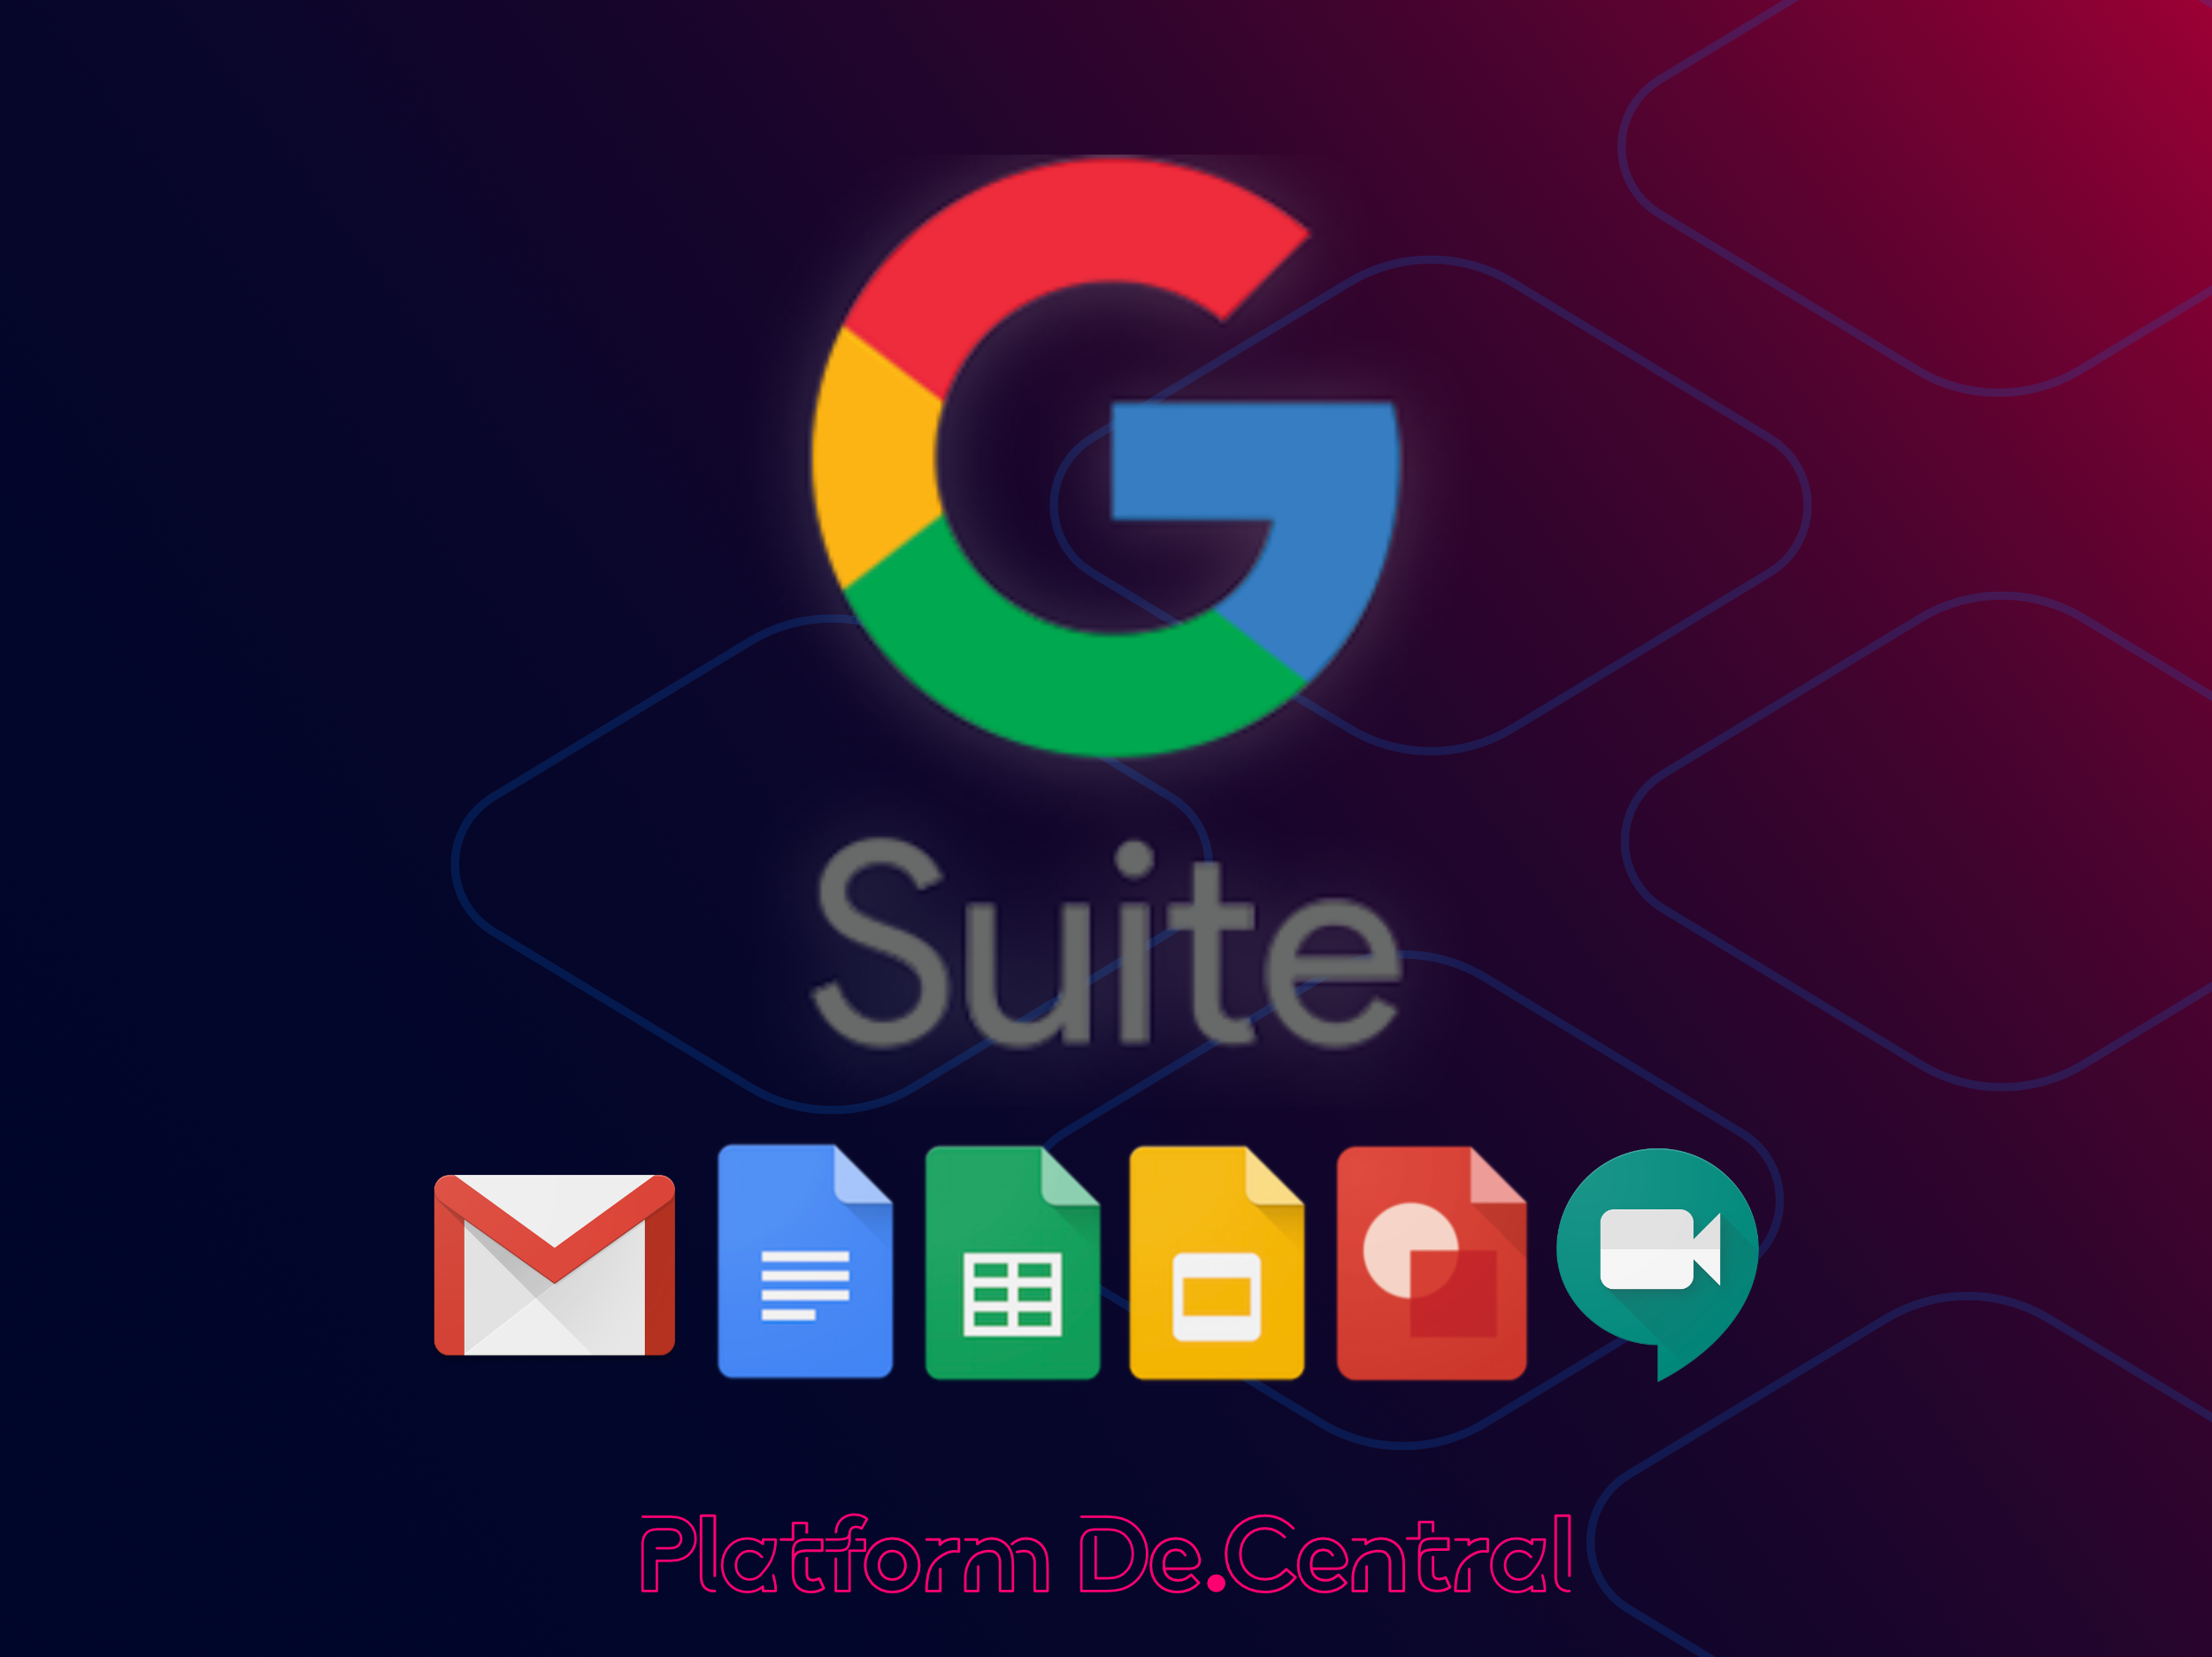 Google Claims G Suite now has 2 Billion Users